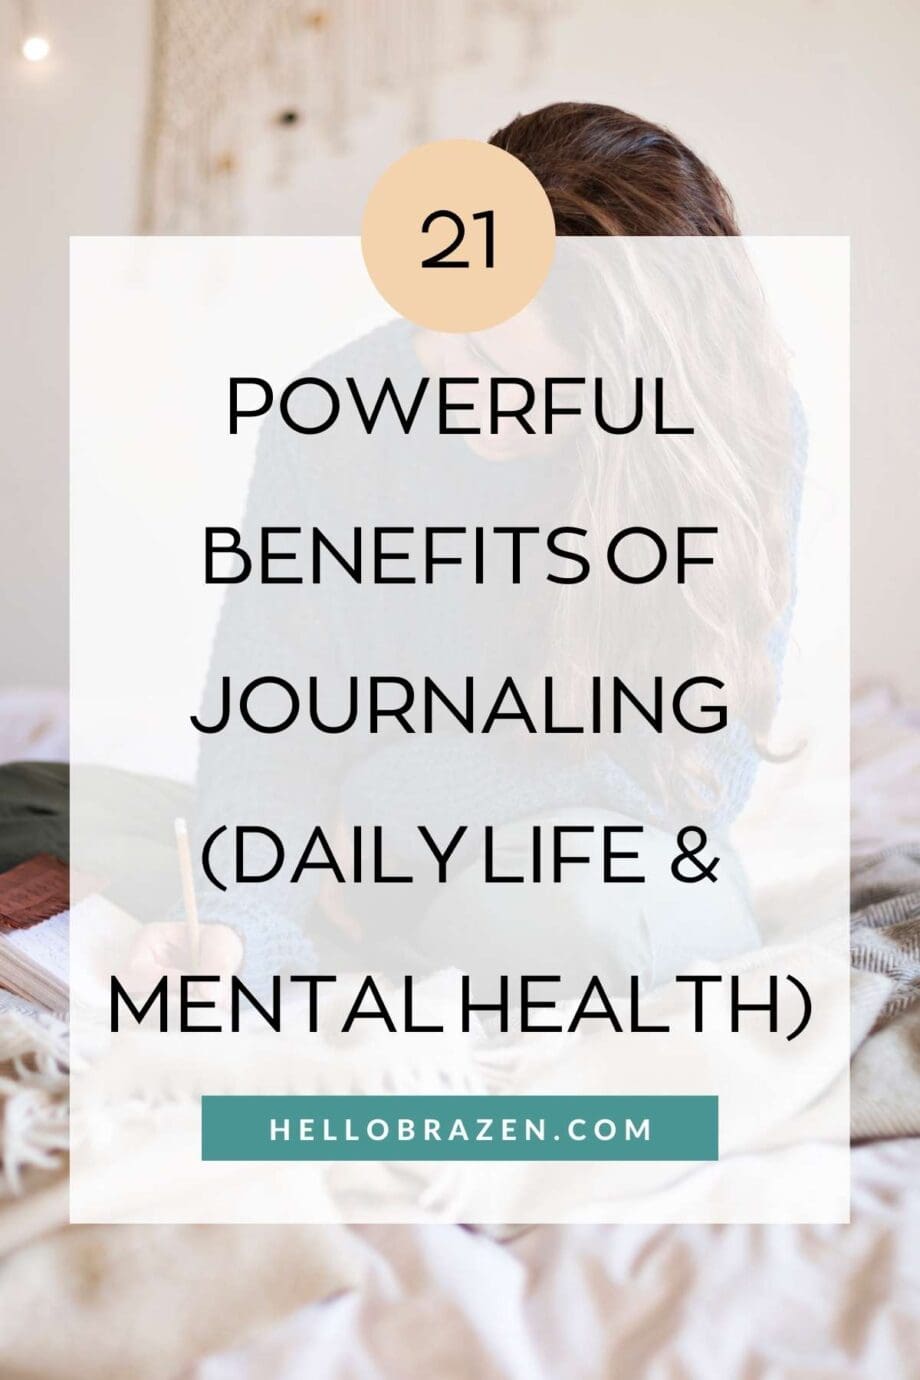 The practice of journaling has been around for centuries, and there’s a reason why – because there are so many powerful benefits of journaling, and this simple activity can have a massive impact on many areas of your life. Here are 21 powerful benefits of journaling for your daily life and mental health.